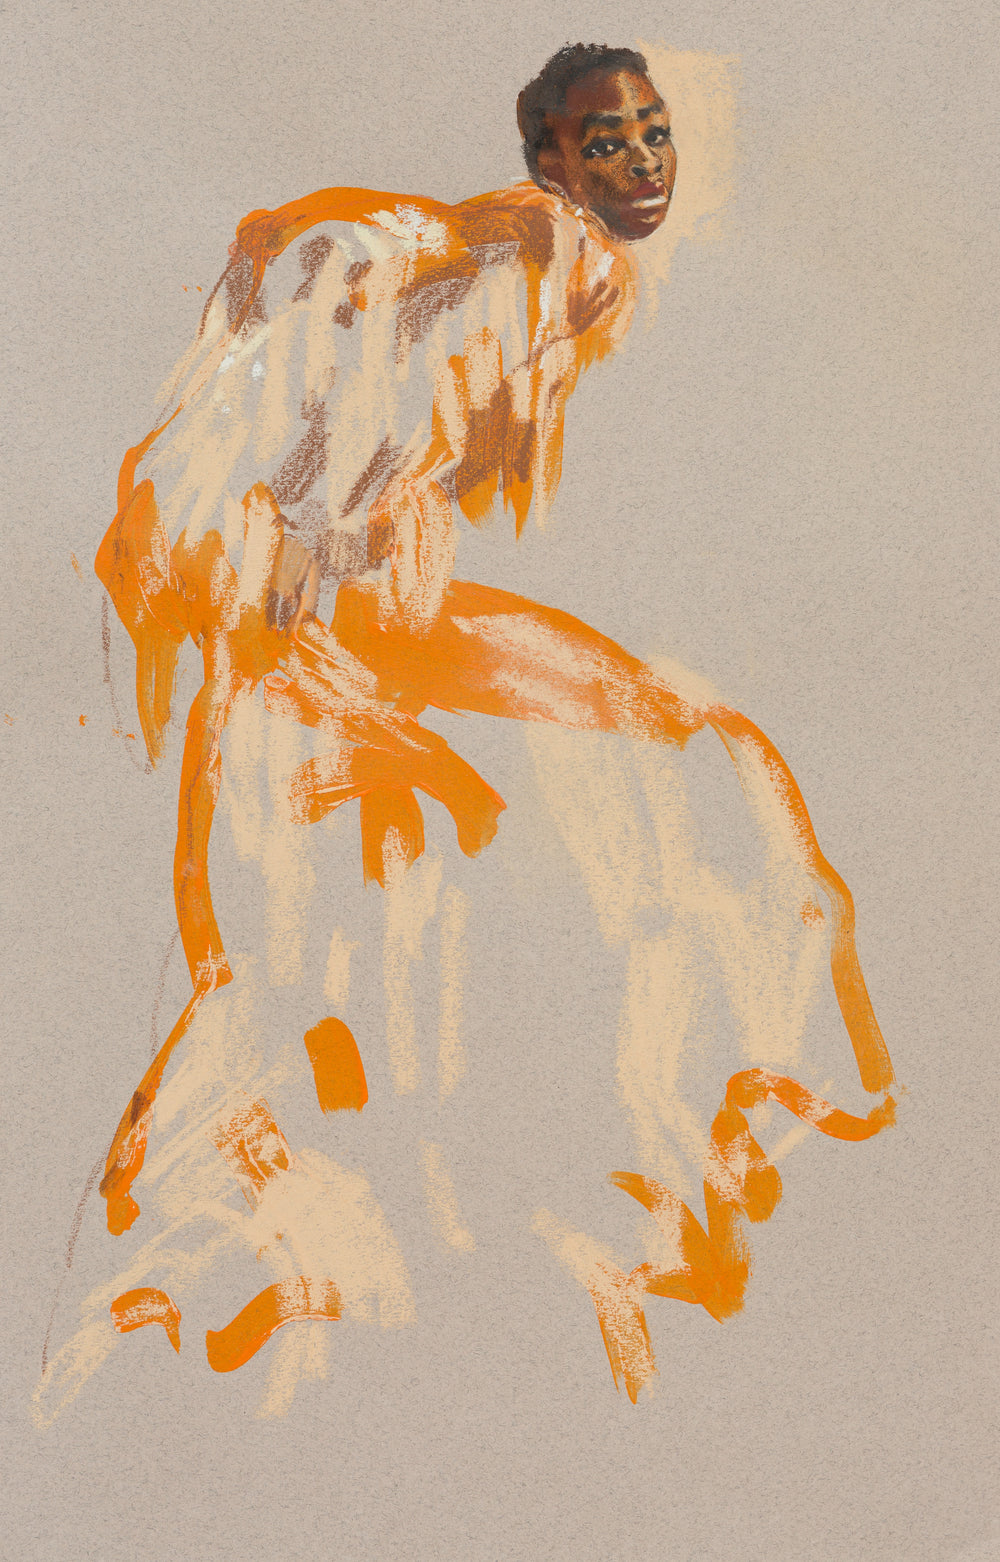 Abstract artwork of a human form with an orange and yellow outfit 